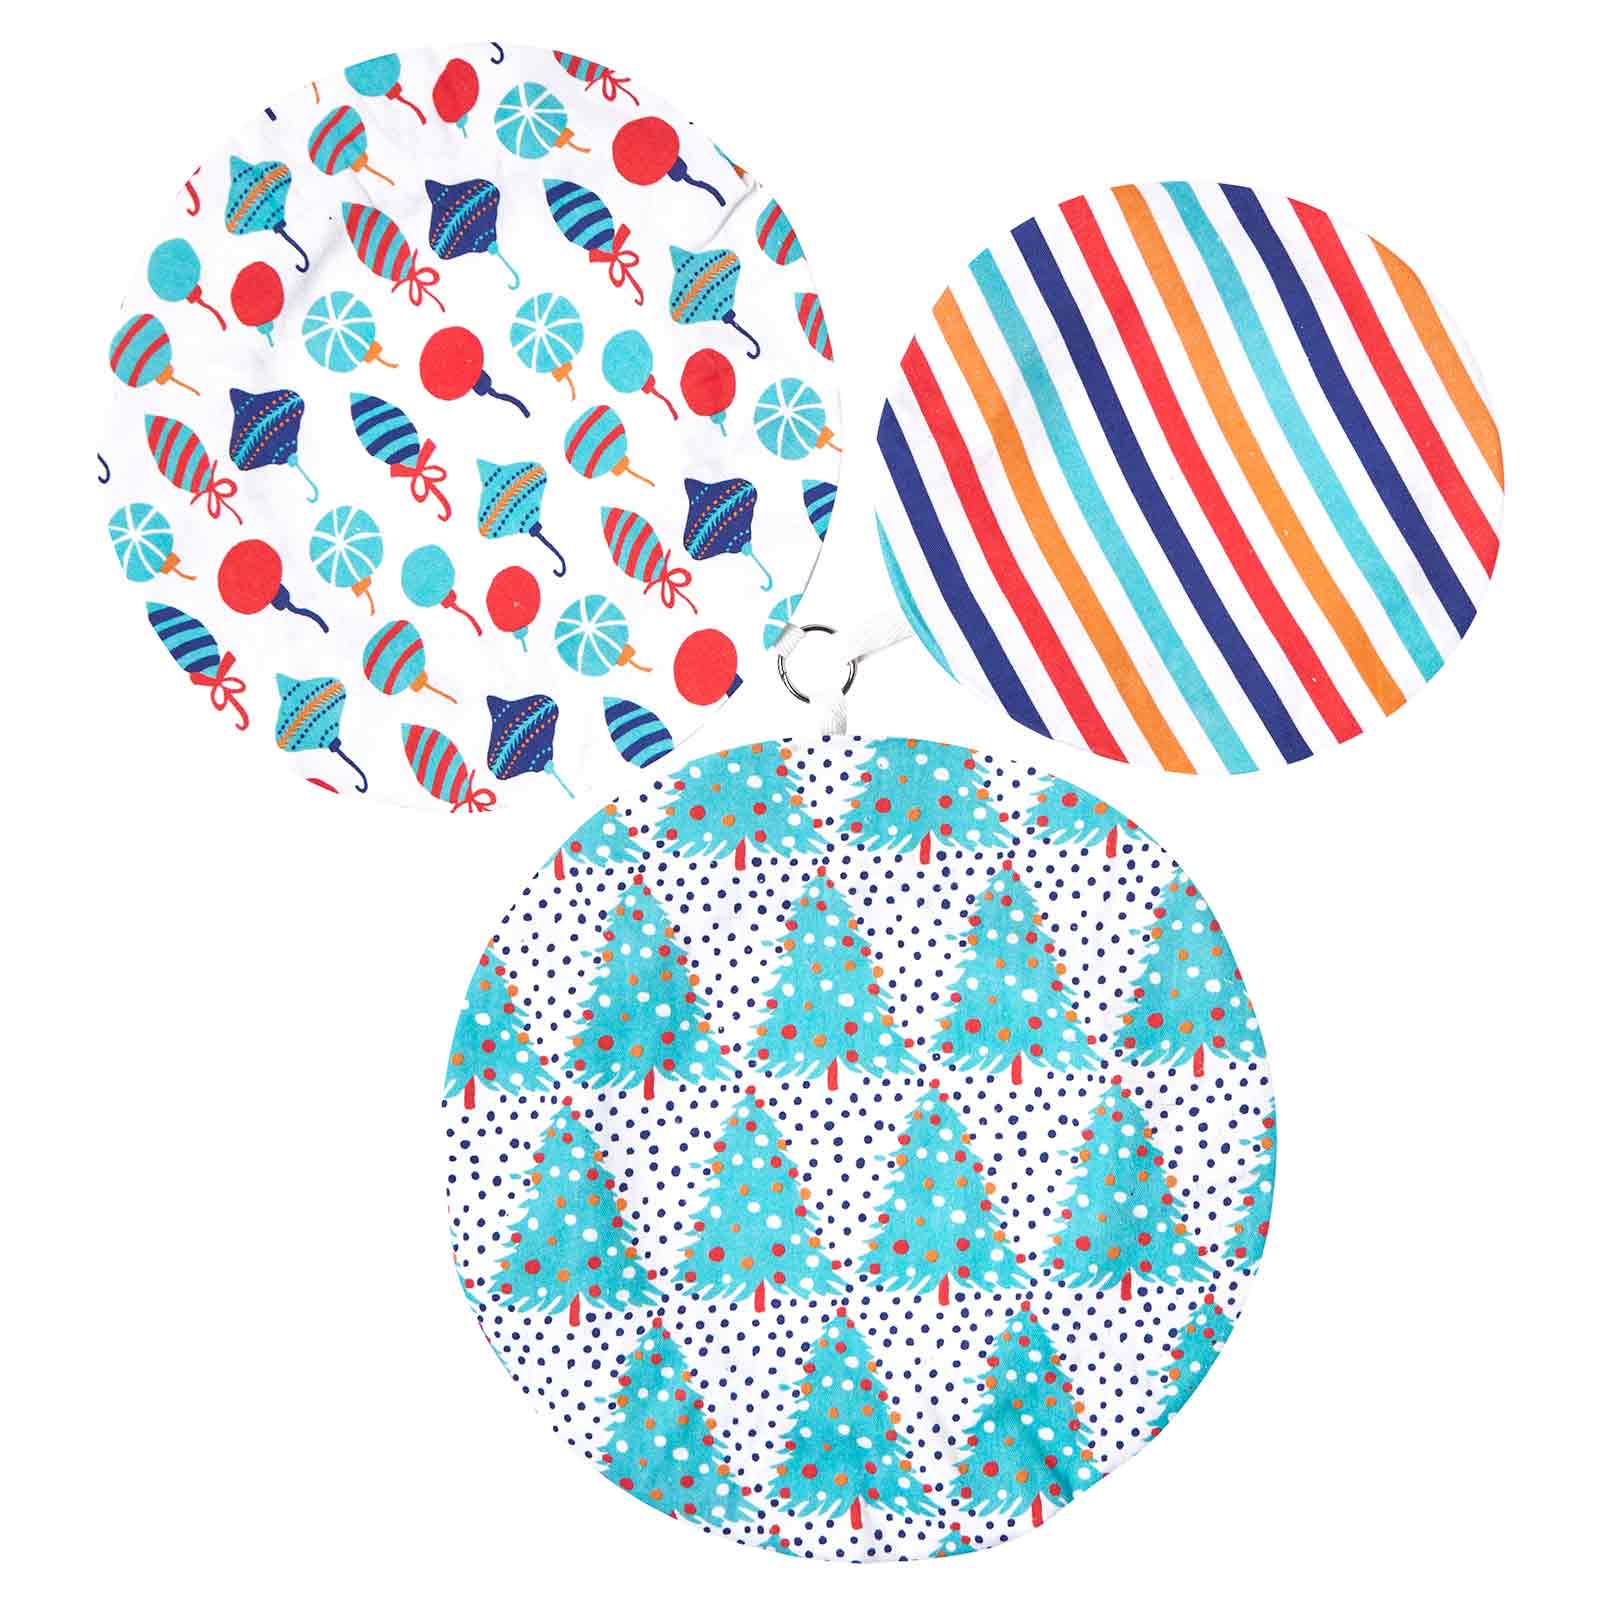 Festive Holiday blu Kitchen Food Storage Covers (Set of 3 ) Eco Dish Cover - rockflowerpaper